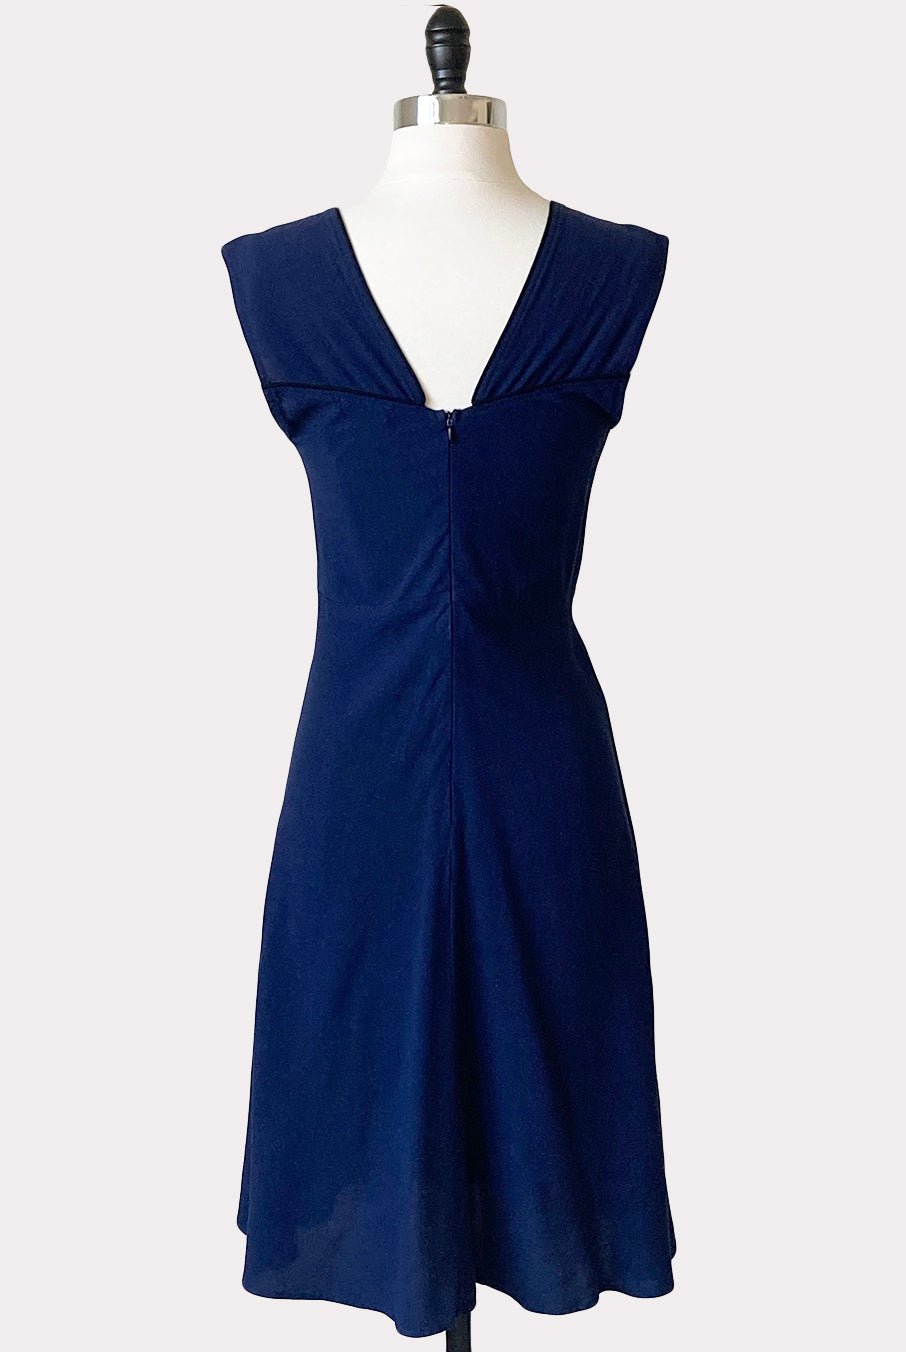 Wanda Empire Waist Dress in Navy by Cameo - Hourglass Boutique